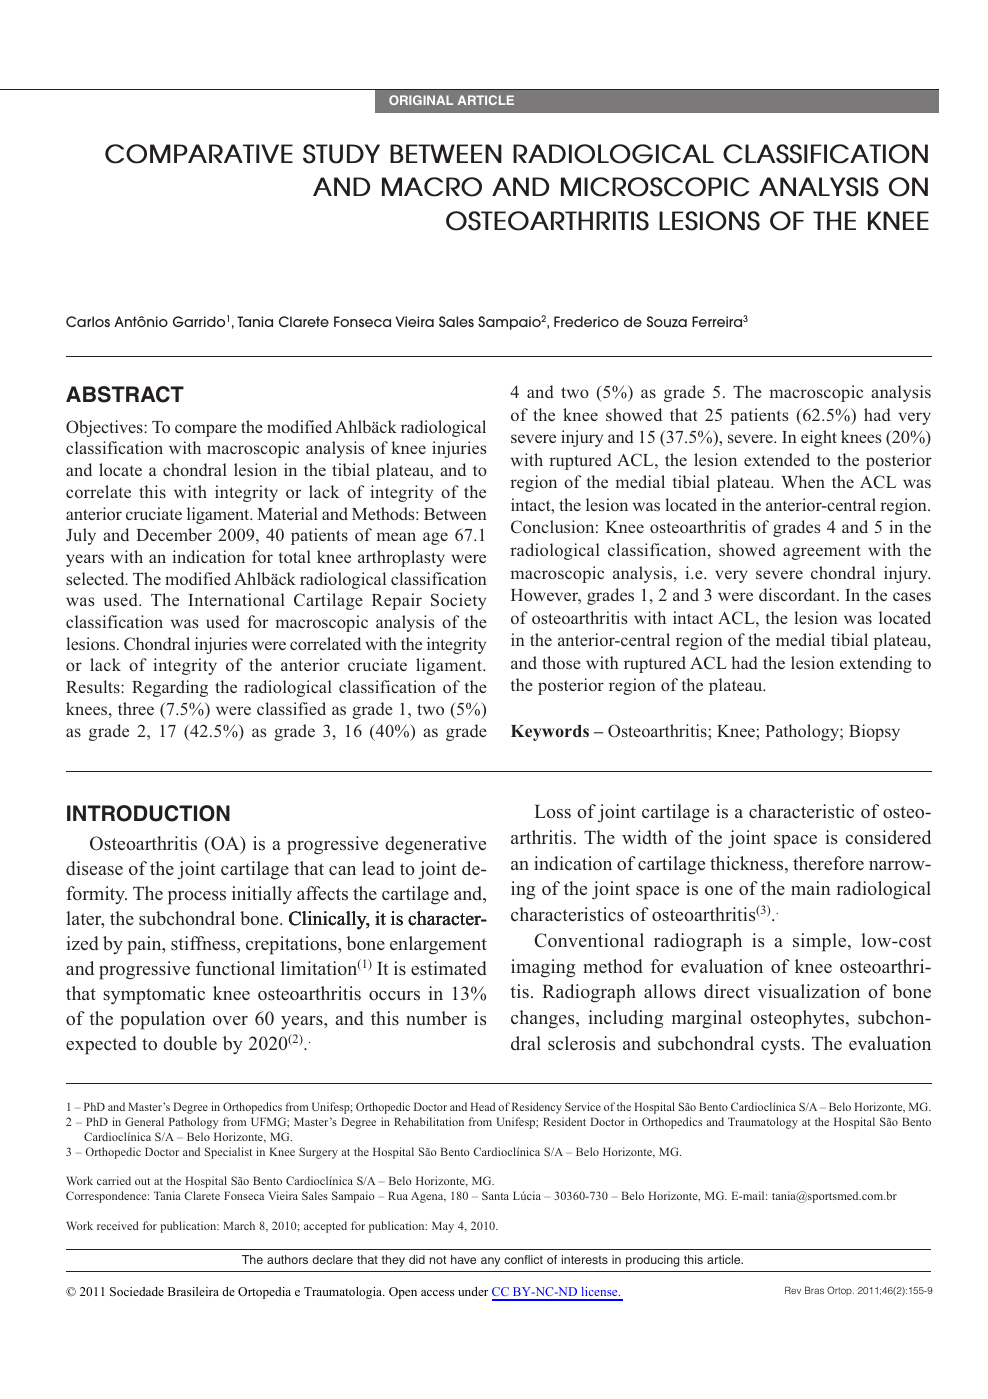 Comparative Study Between Radiological Classification And Macro And Microscopic Analysis On Osteoarthritis Lesions Of The Knee Topic Of Research Paper In Clinical Medicine Download Scholarly Article Pdf And Read For Free